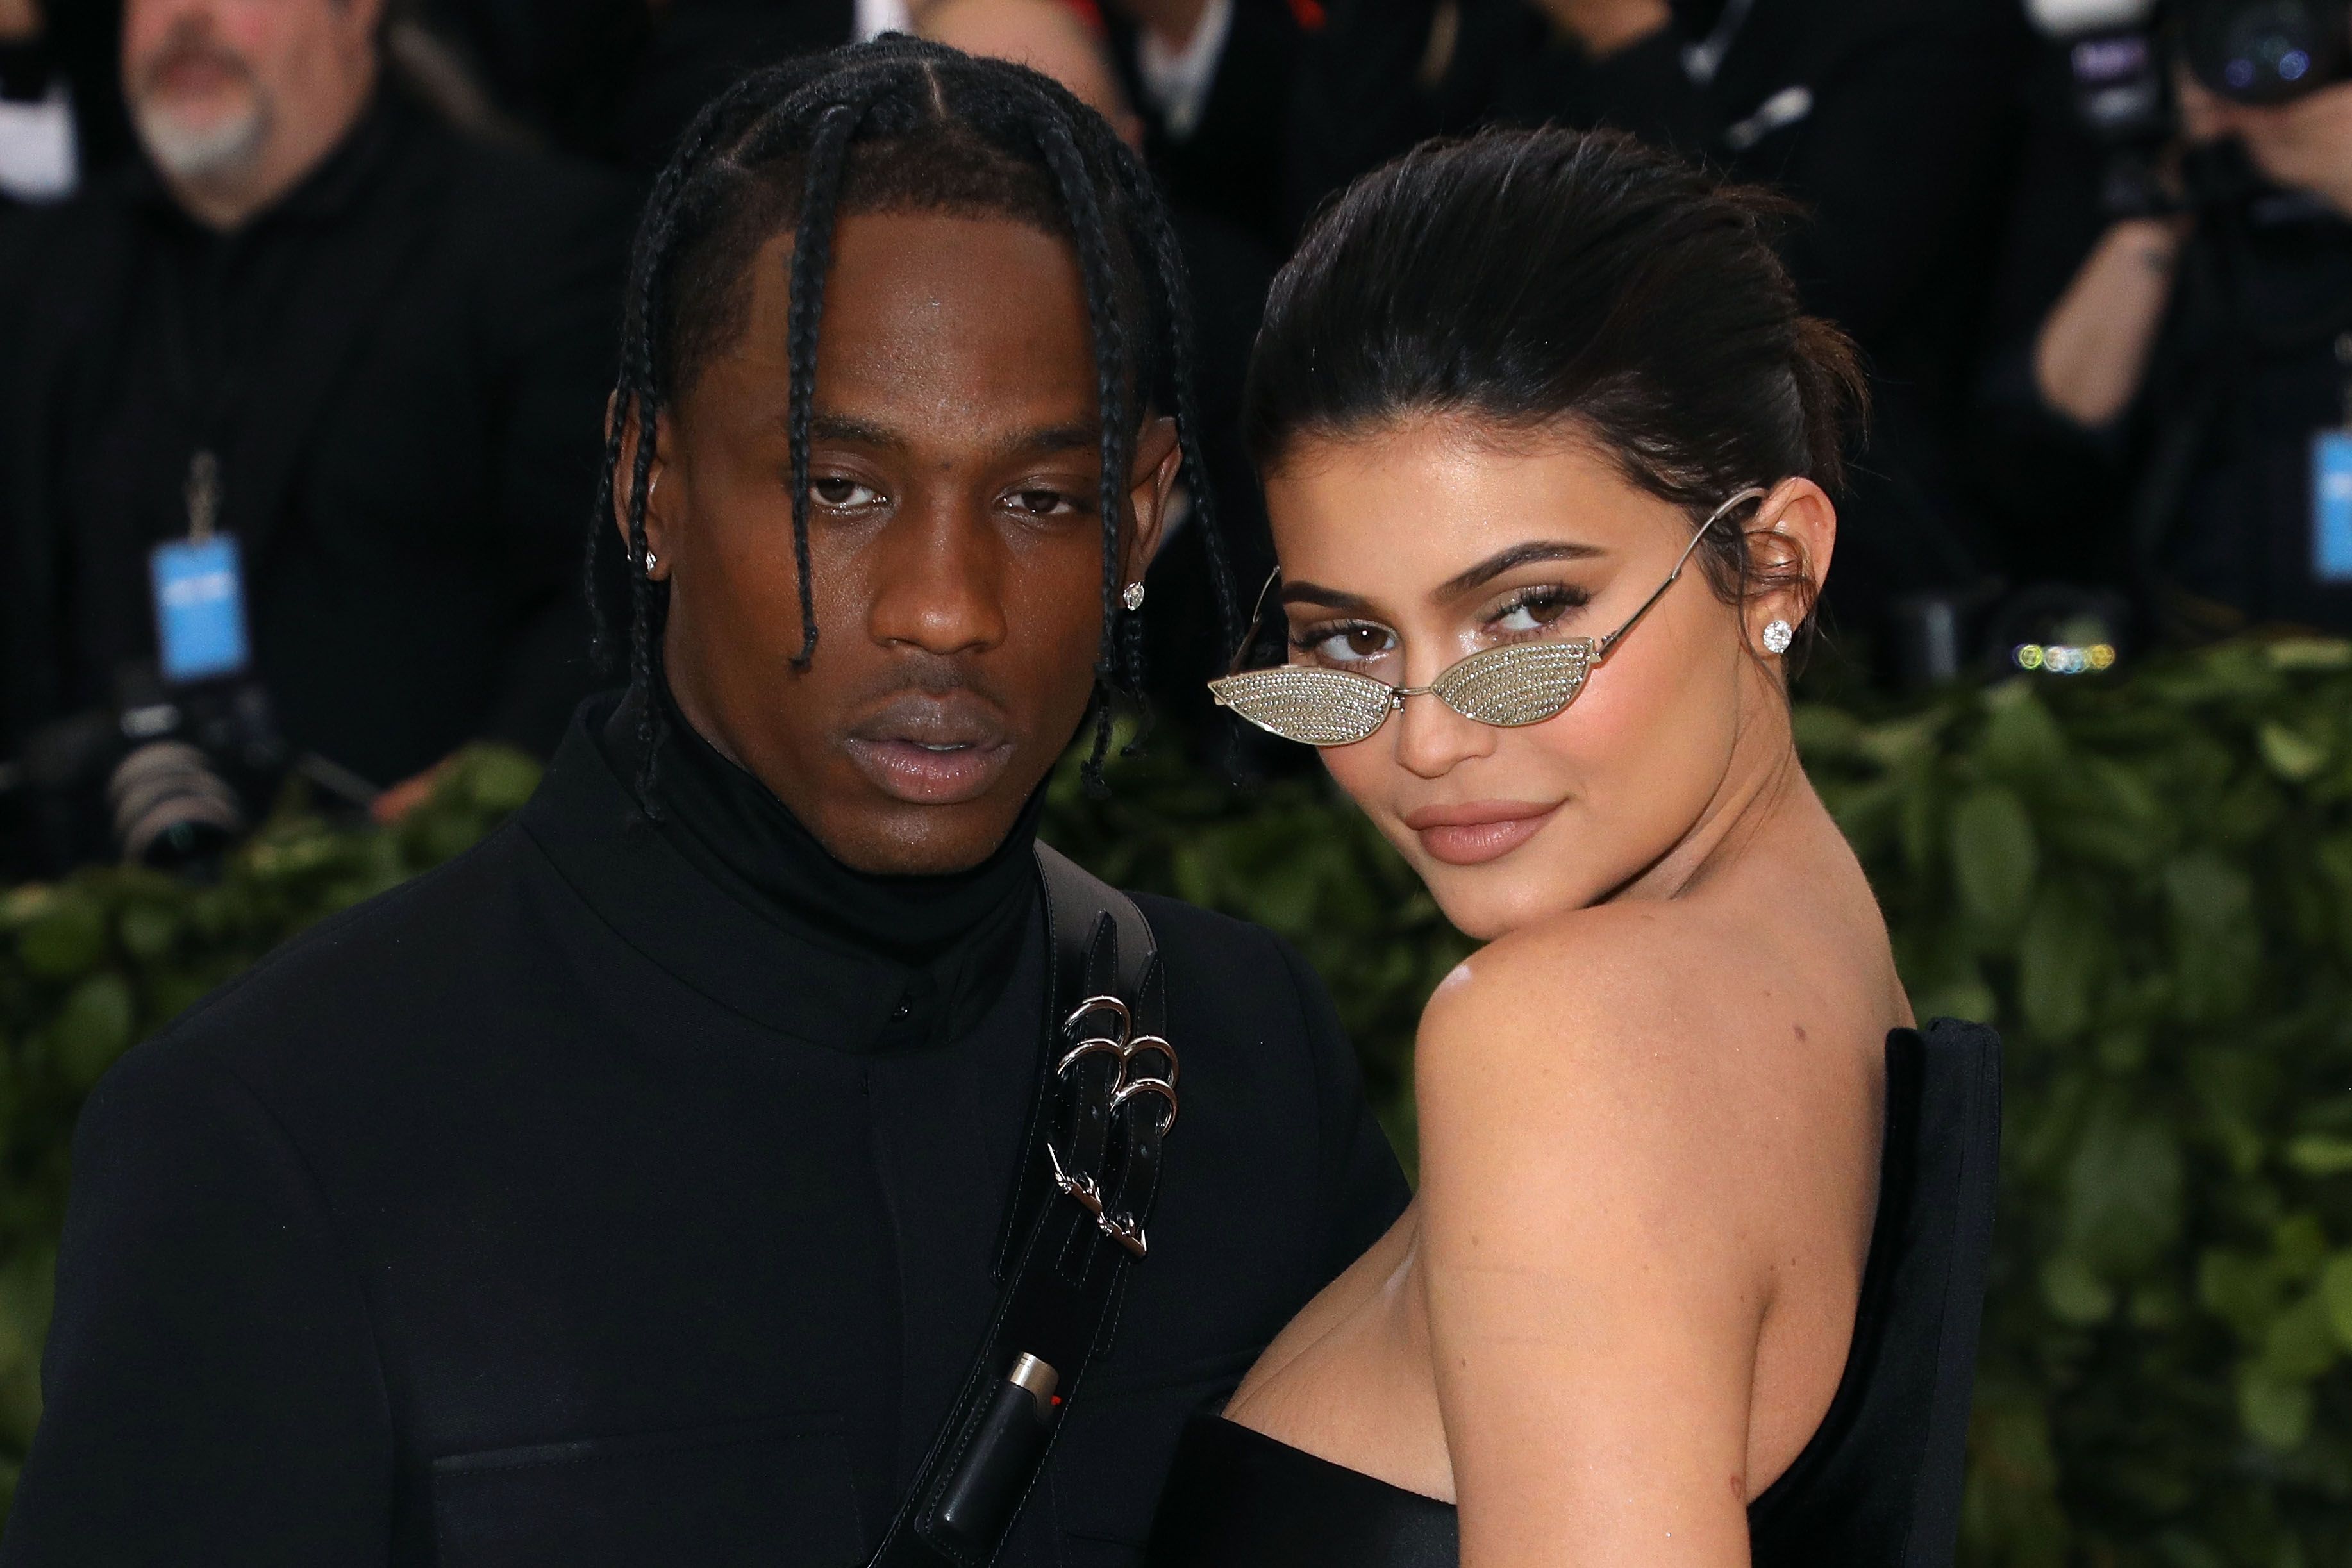 Travis Scott and Kylie Jenner at the "Heavenly Bodies: Fashion & the Catholic Imagination" event on May 7, 2018. | Photo: Getty Images